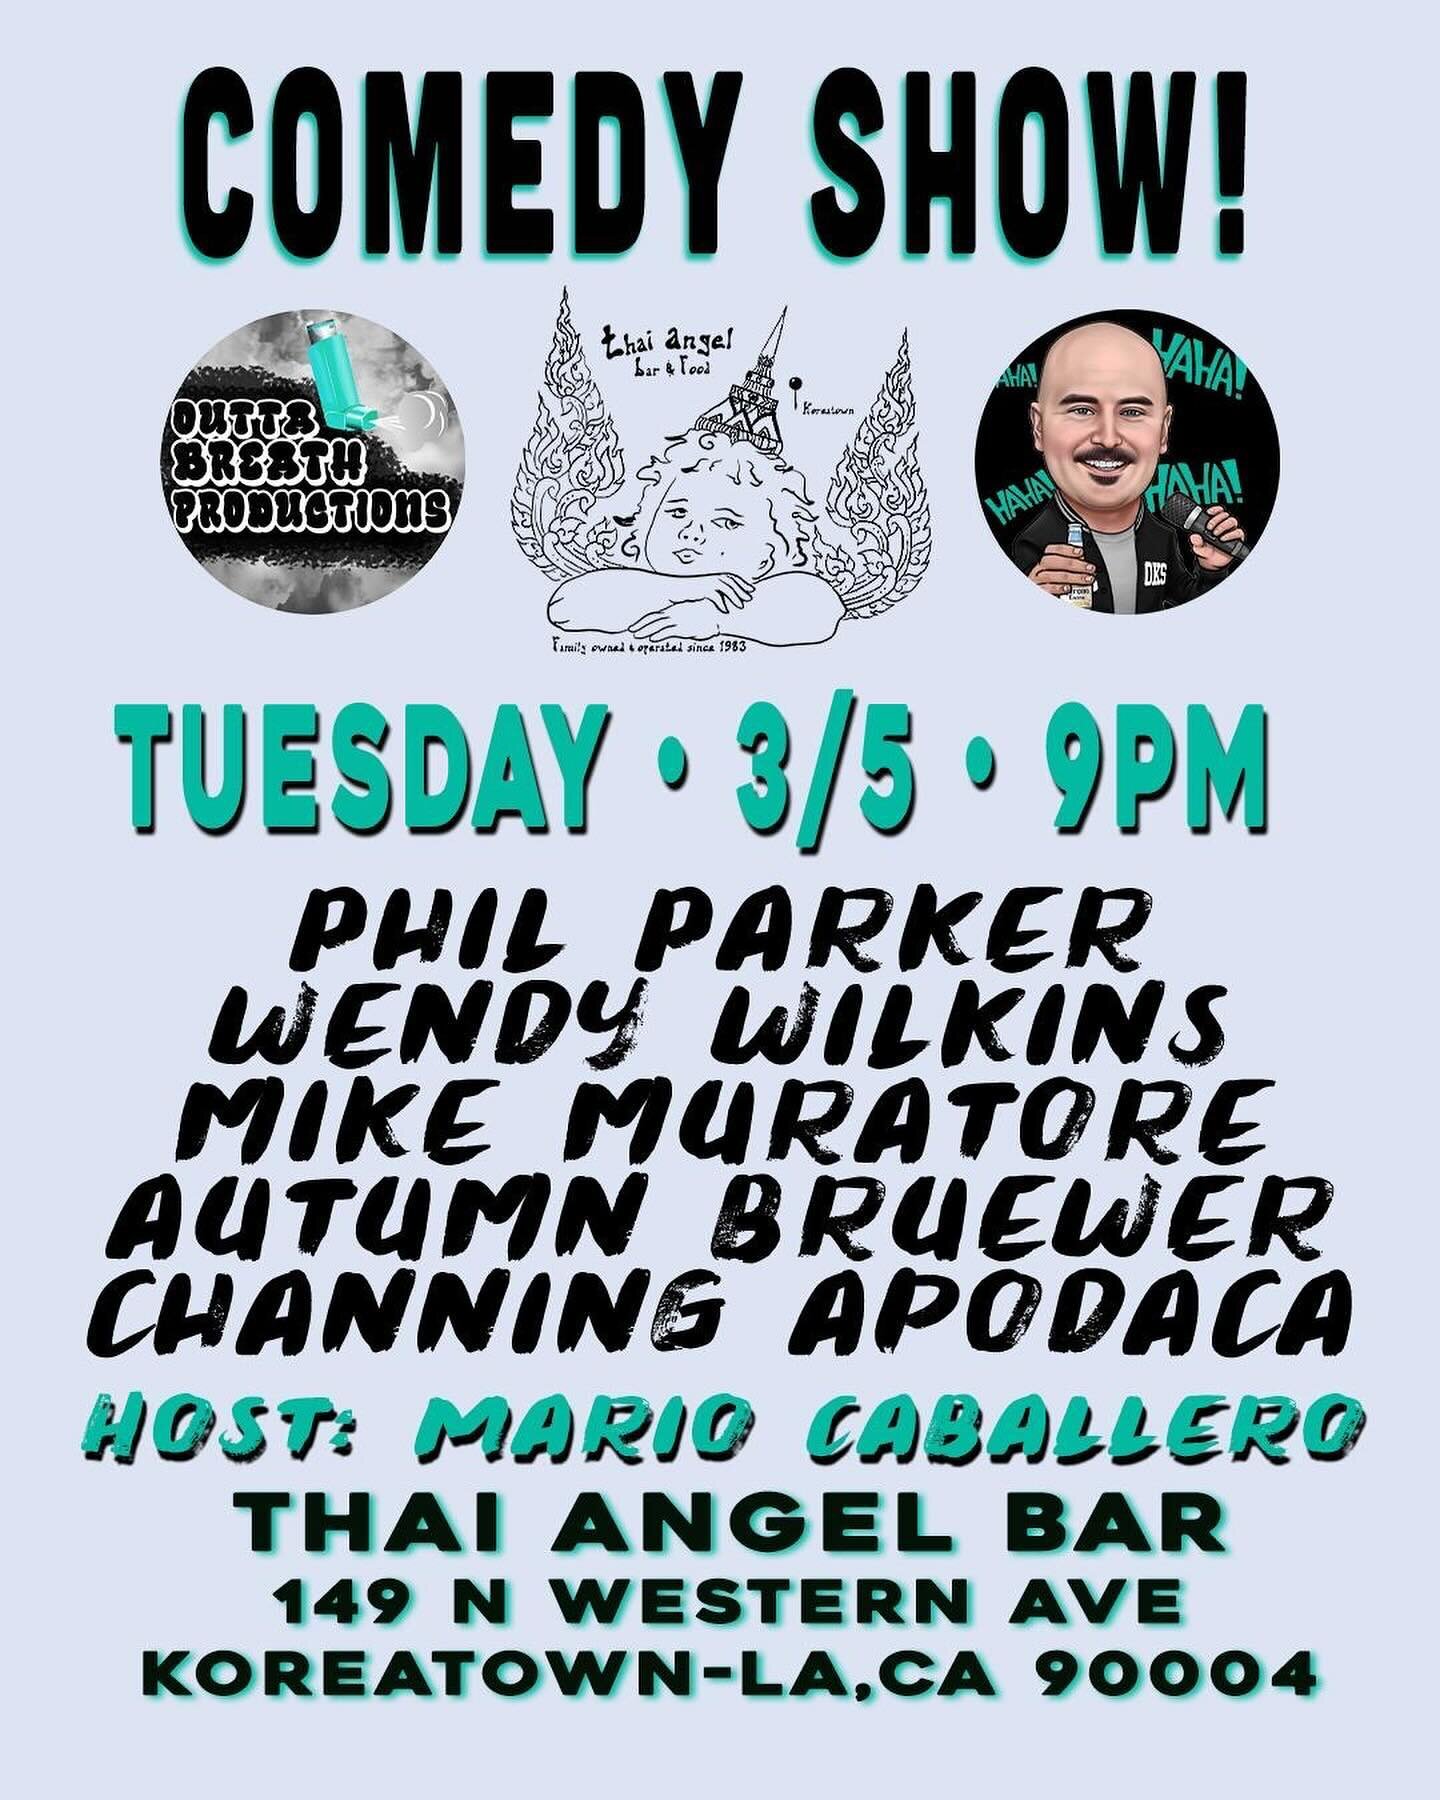 Thai bar in Koreatown? I was concerned, but Wikipedia put me at ease. Tomorrow. #comedy #koreatownla #thai